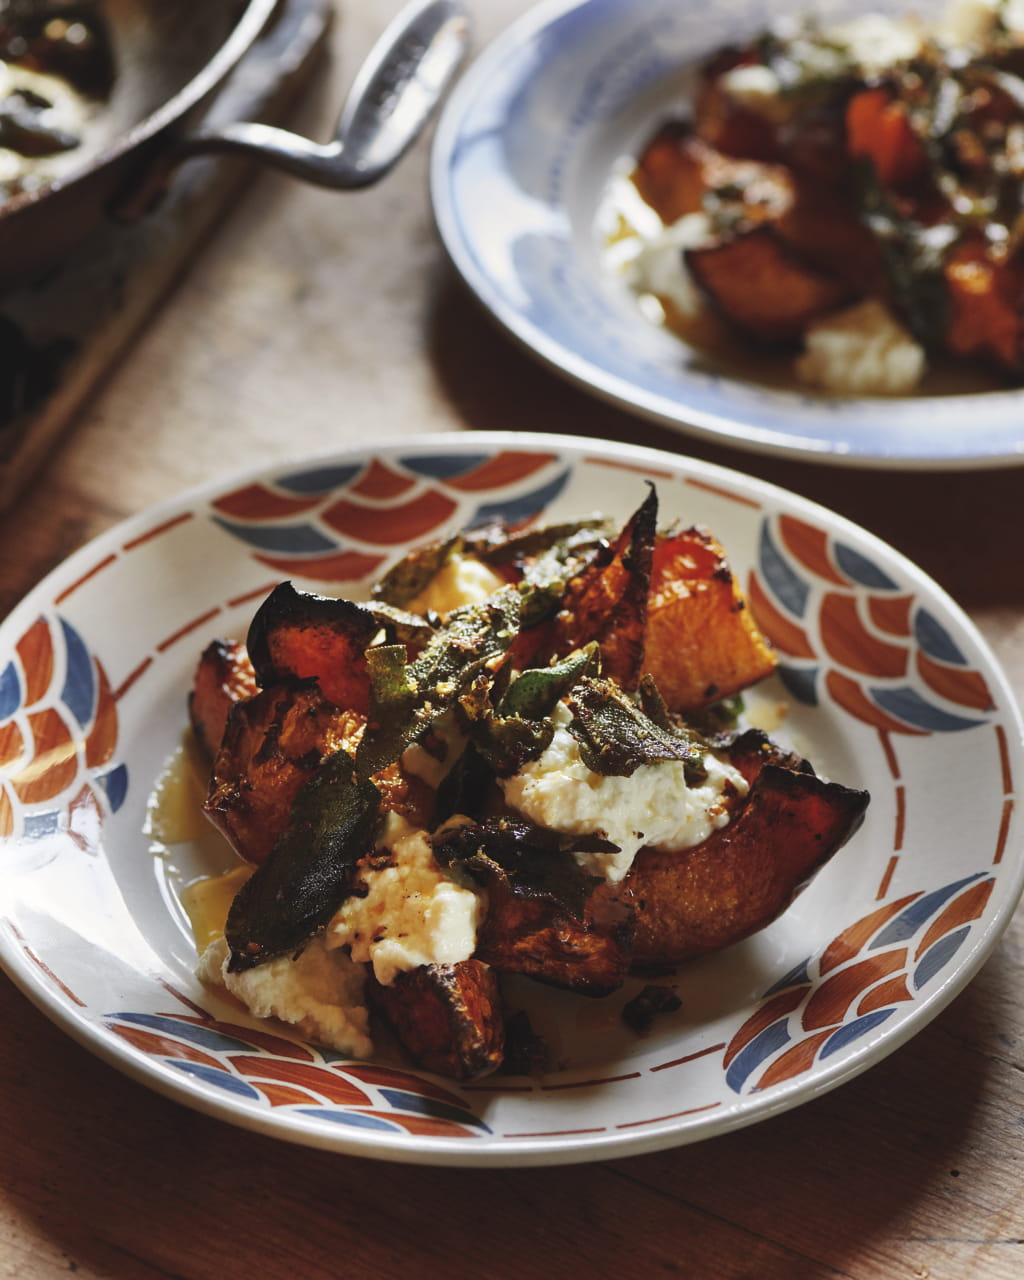 Roast crown prince squash, ricotta and caramelised chilli sage butter